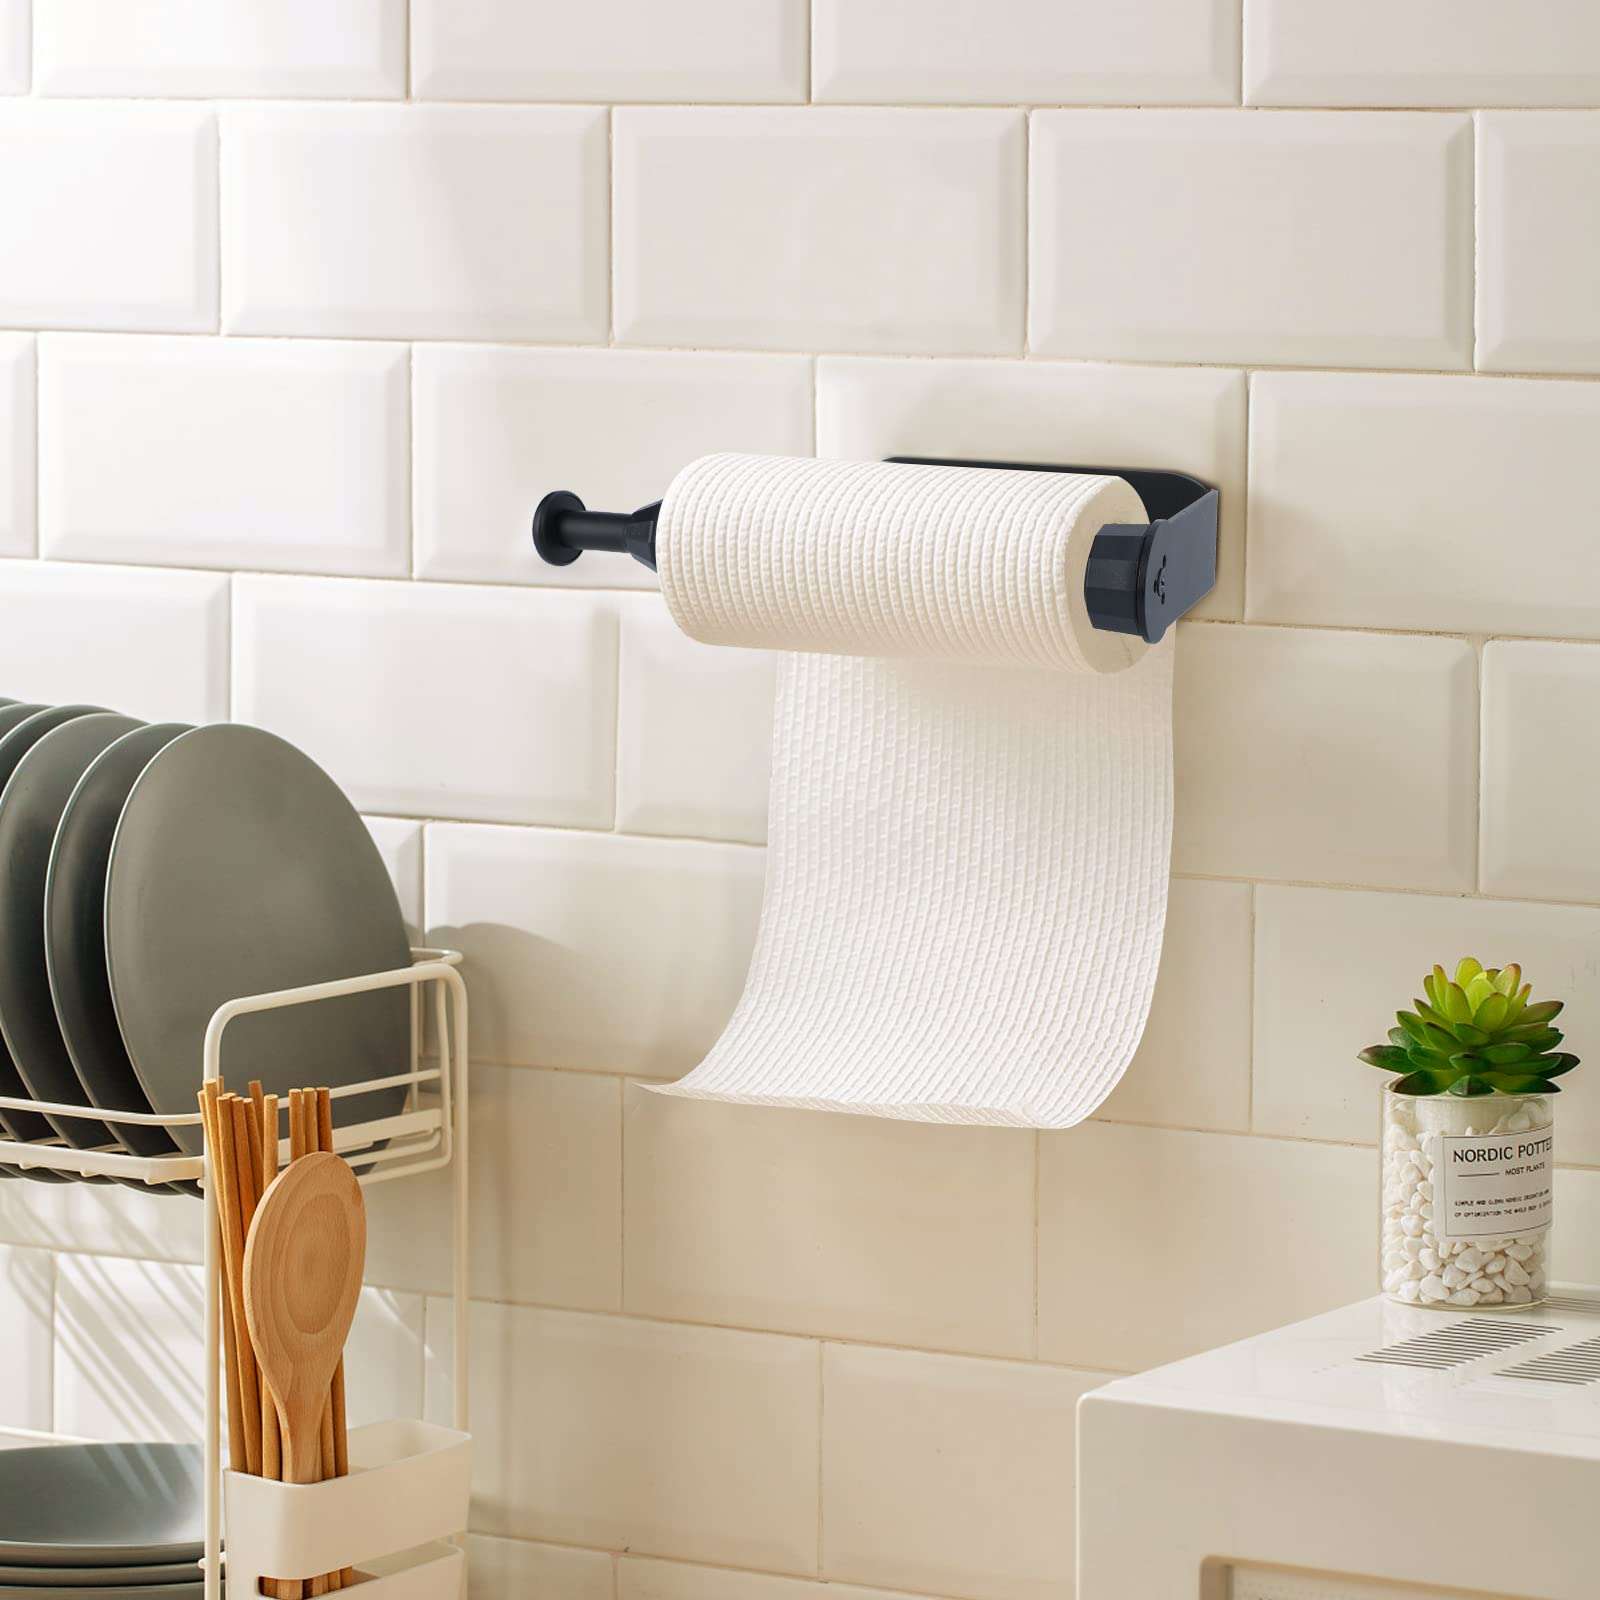 is it safe to use paper towel holder